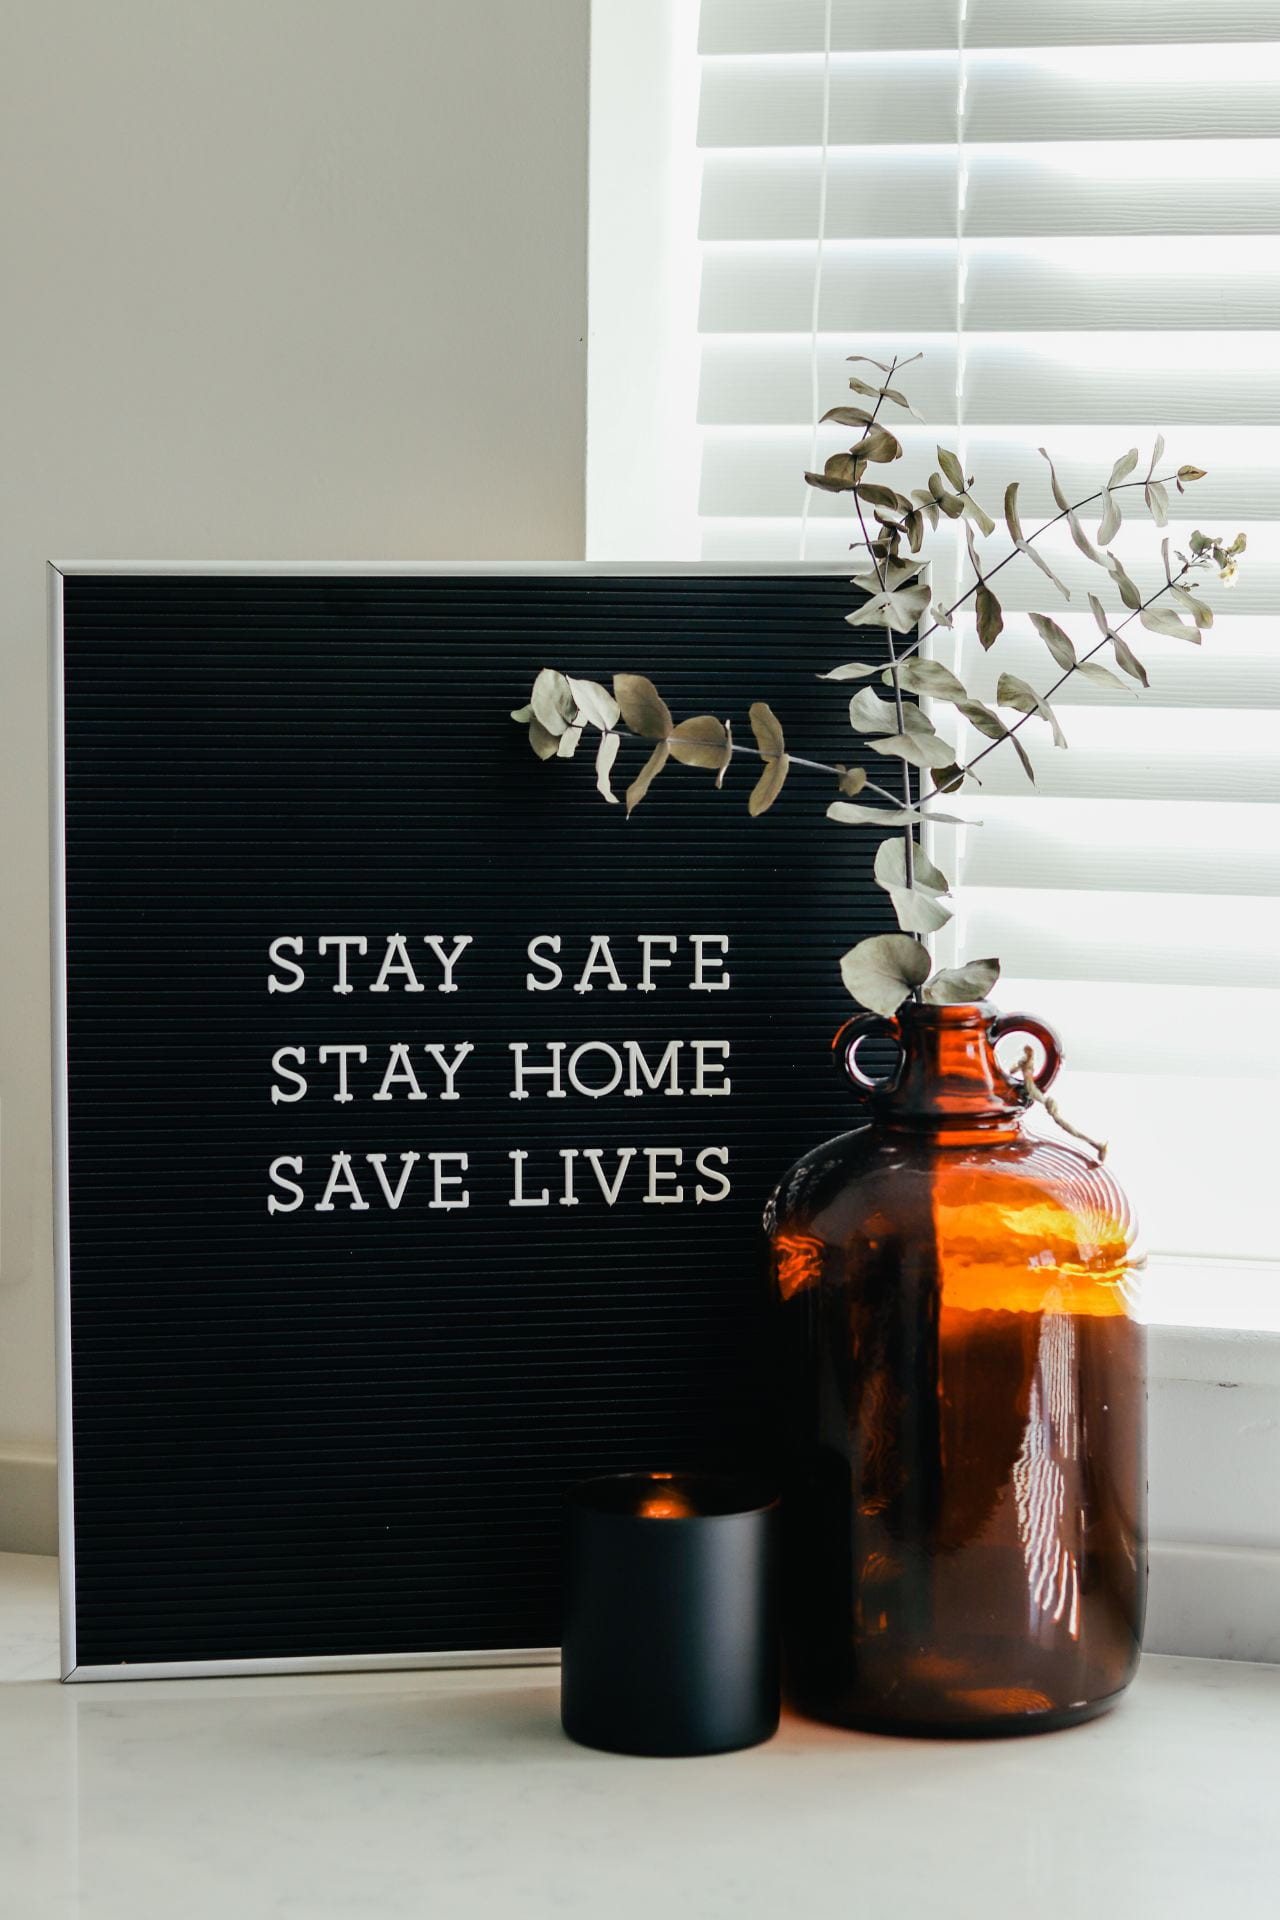 Framed photograph that reads: Stay Safe, Stay Home, Save Lives. Potted plant and a candle are in the foreground of the image.